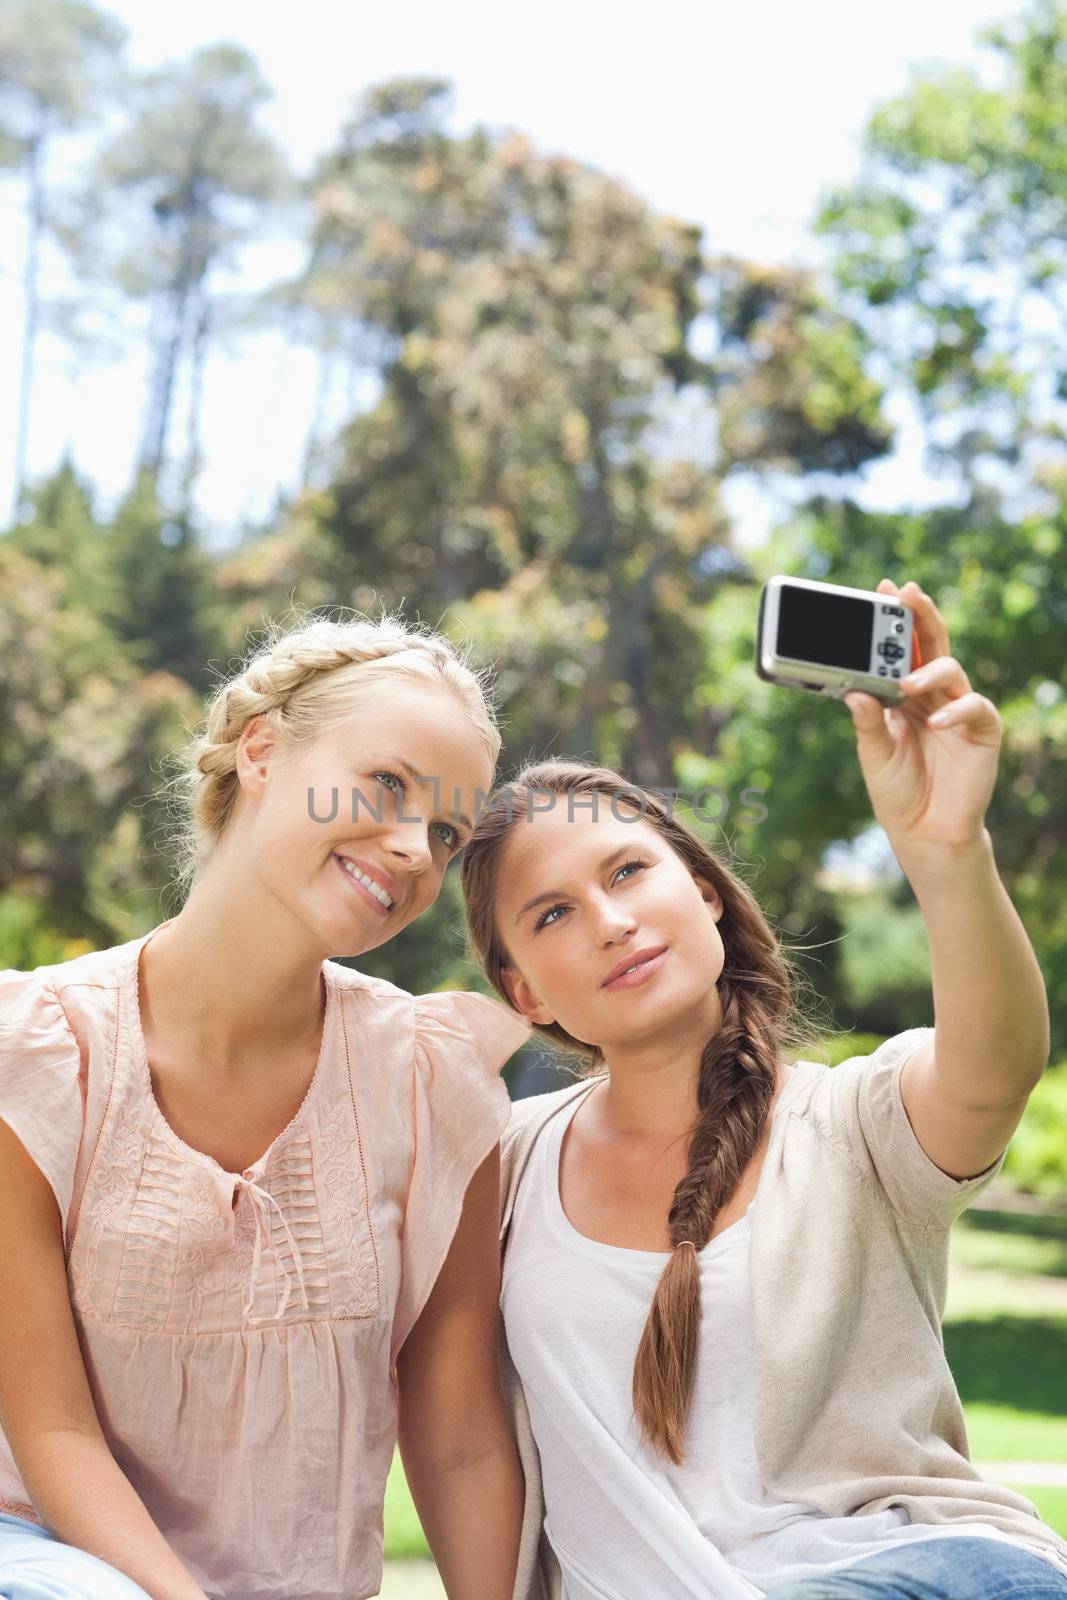 Young woman taking a picture of herself and a friend